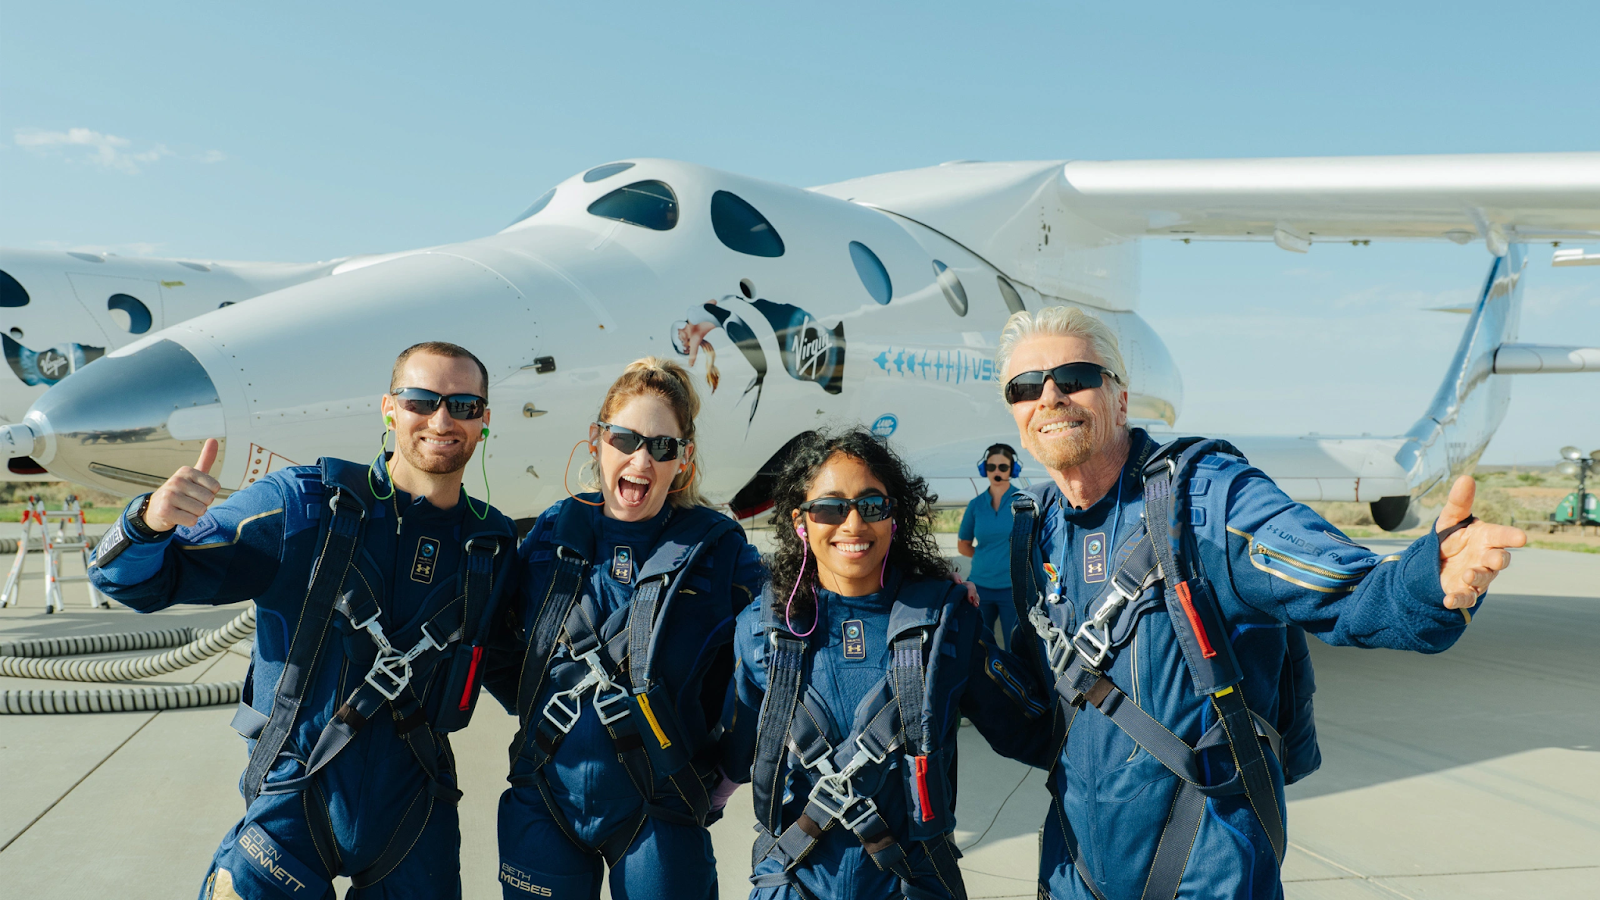 Richard Branson along with 4 other crew members and passengers travelled to space.